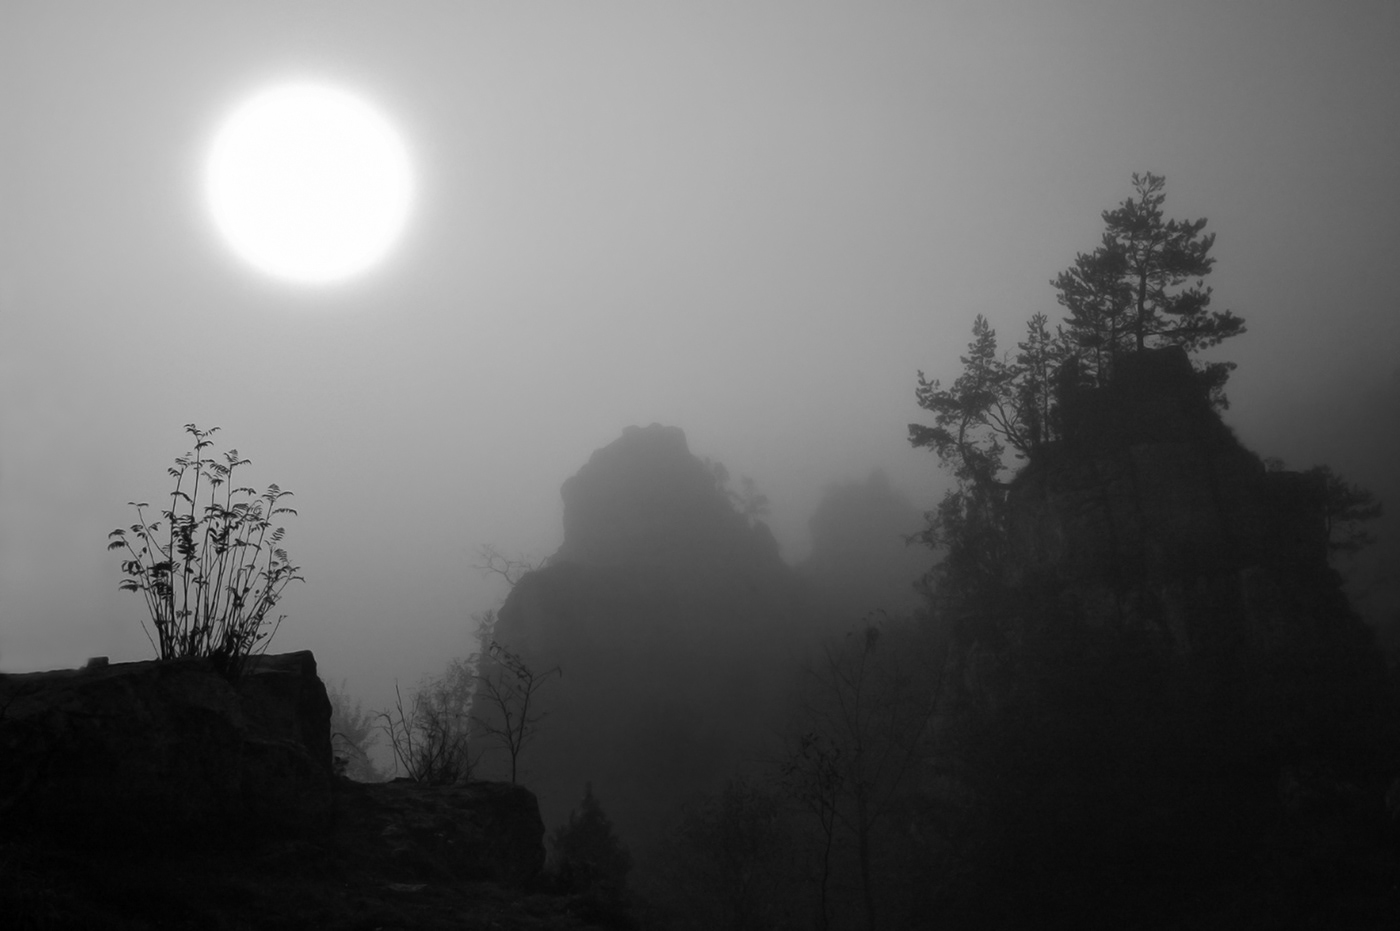 Sun flower Still water Tree  fence mountains wooden church Castle house mist black and white fog